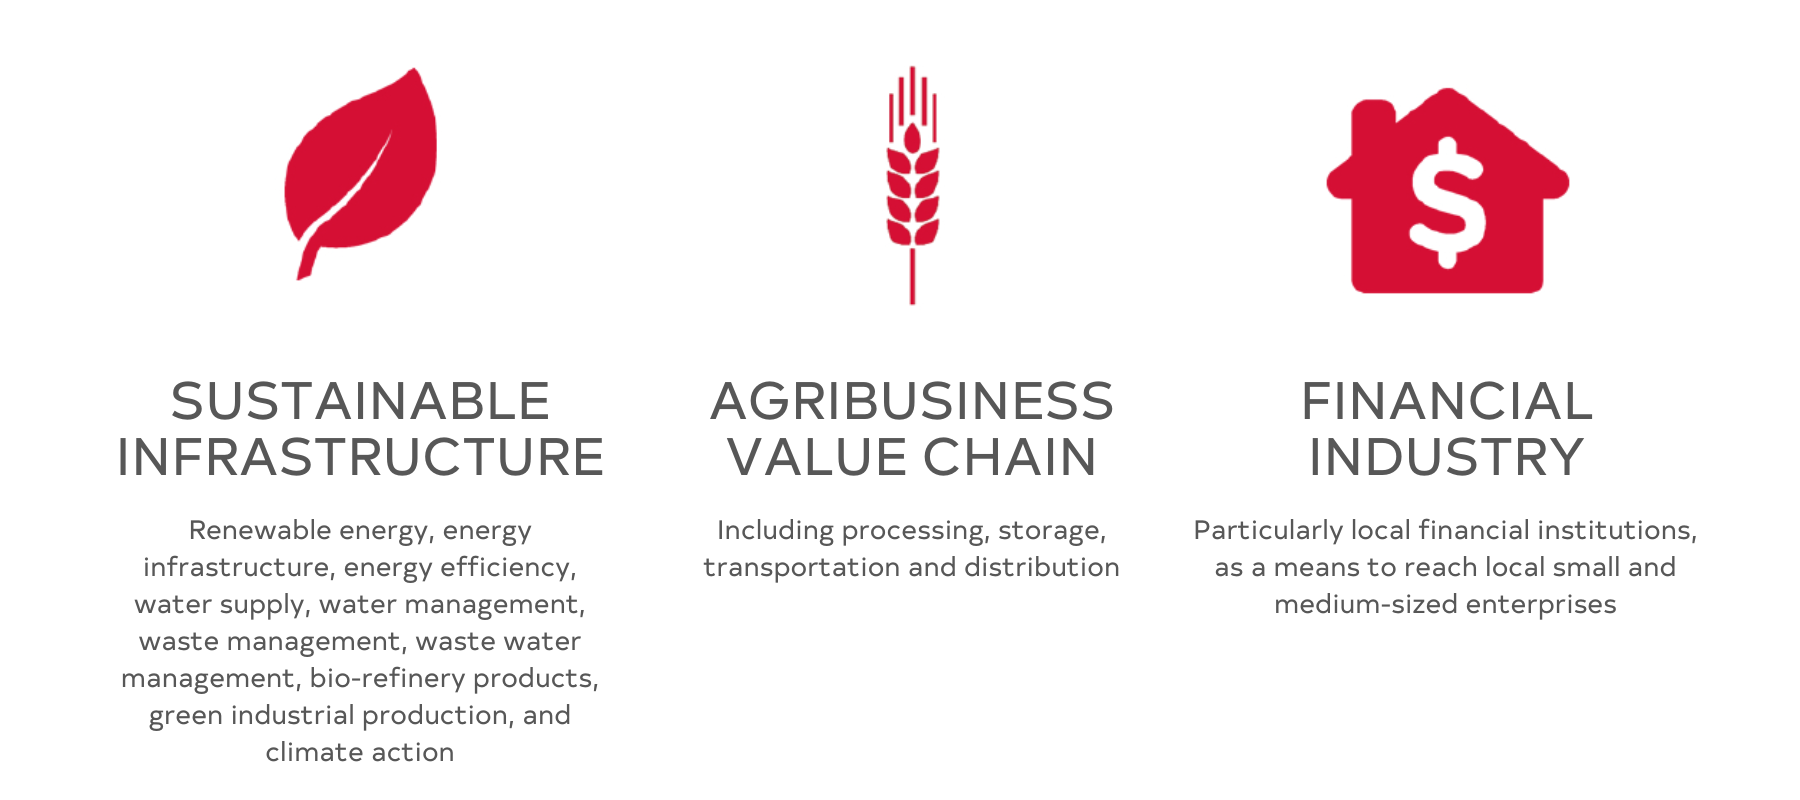 Agribusiness value chain, sustainable infrastructure, financial industry